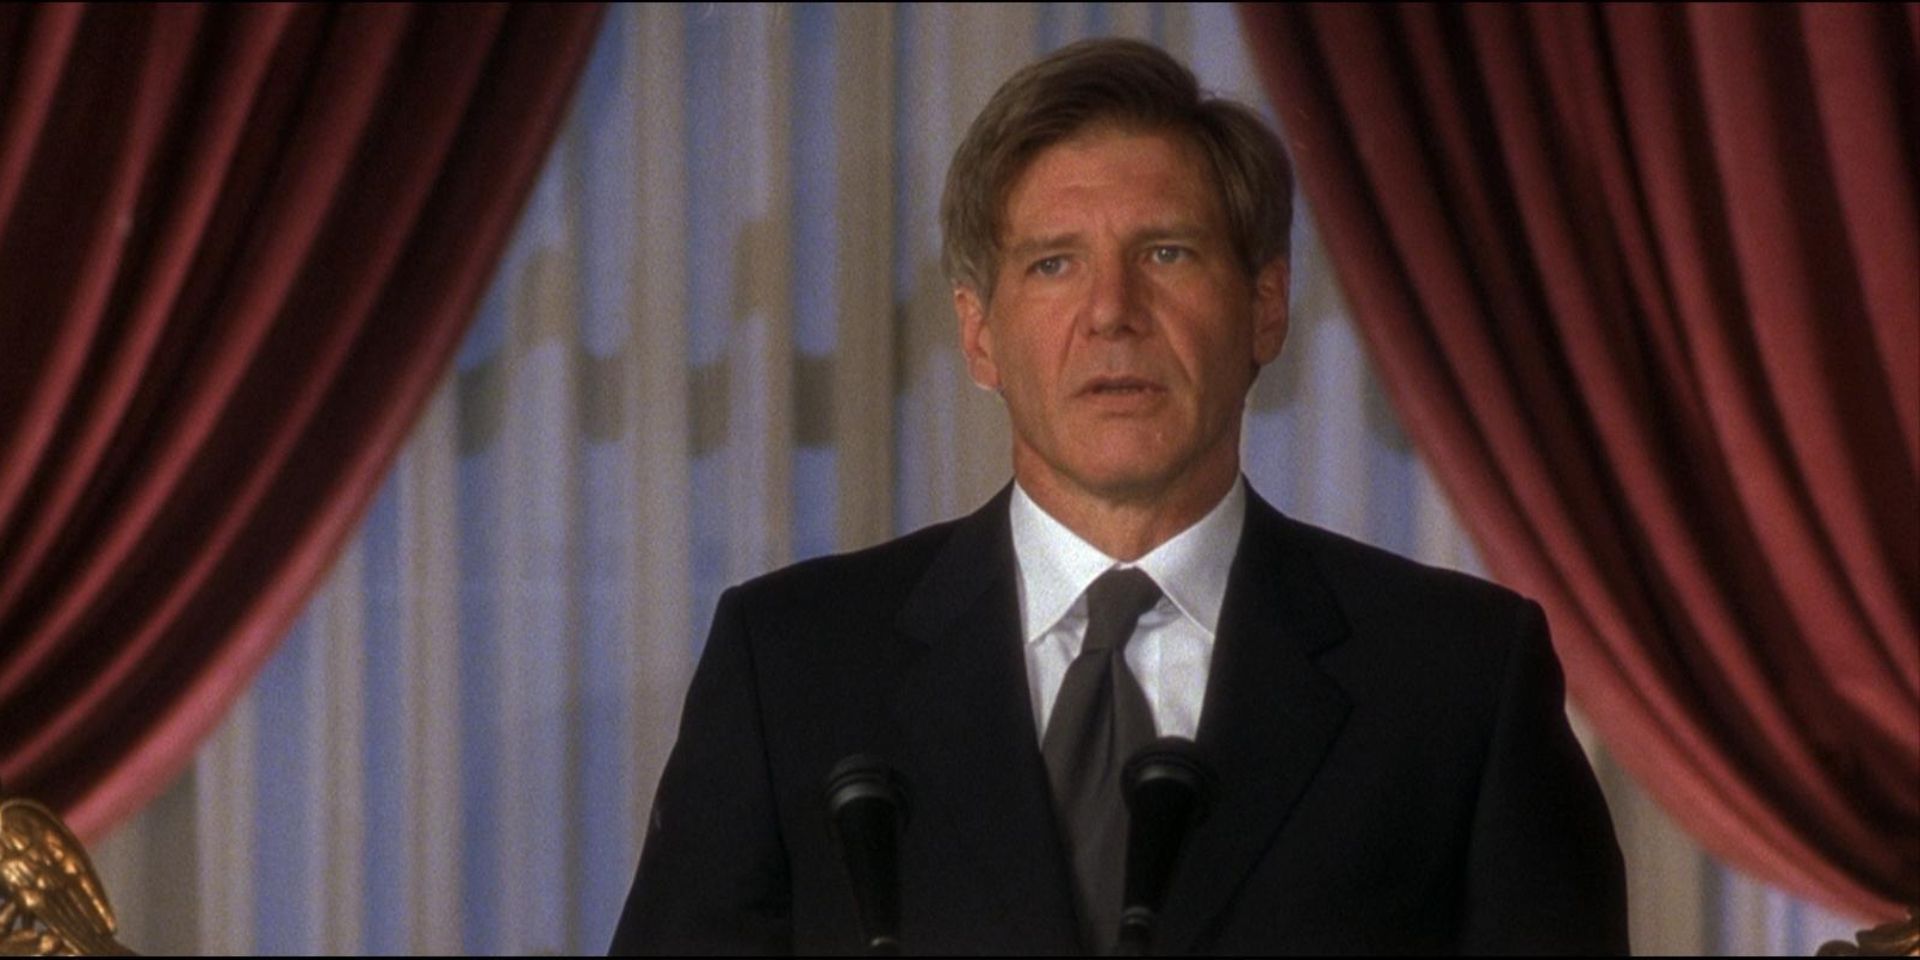 Harrison Ford as President James Marshall standing at a speech podium with a neutral expression in Air Force One